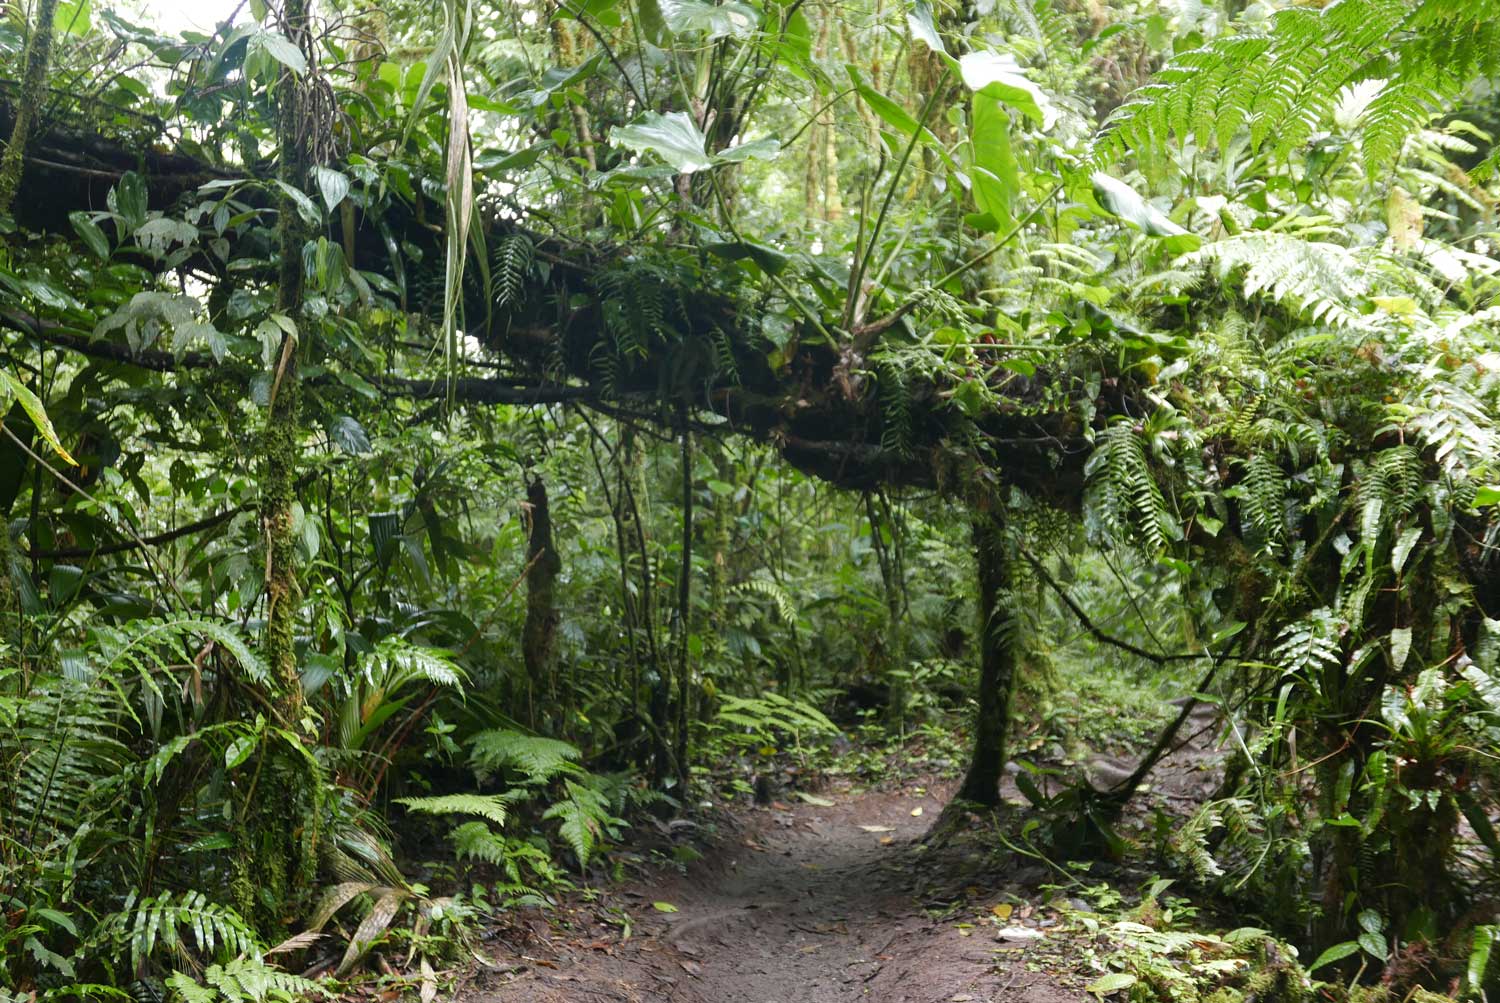 Trees everywhere along and across the pathway in Santa Elena cloud forest